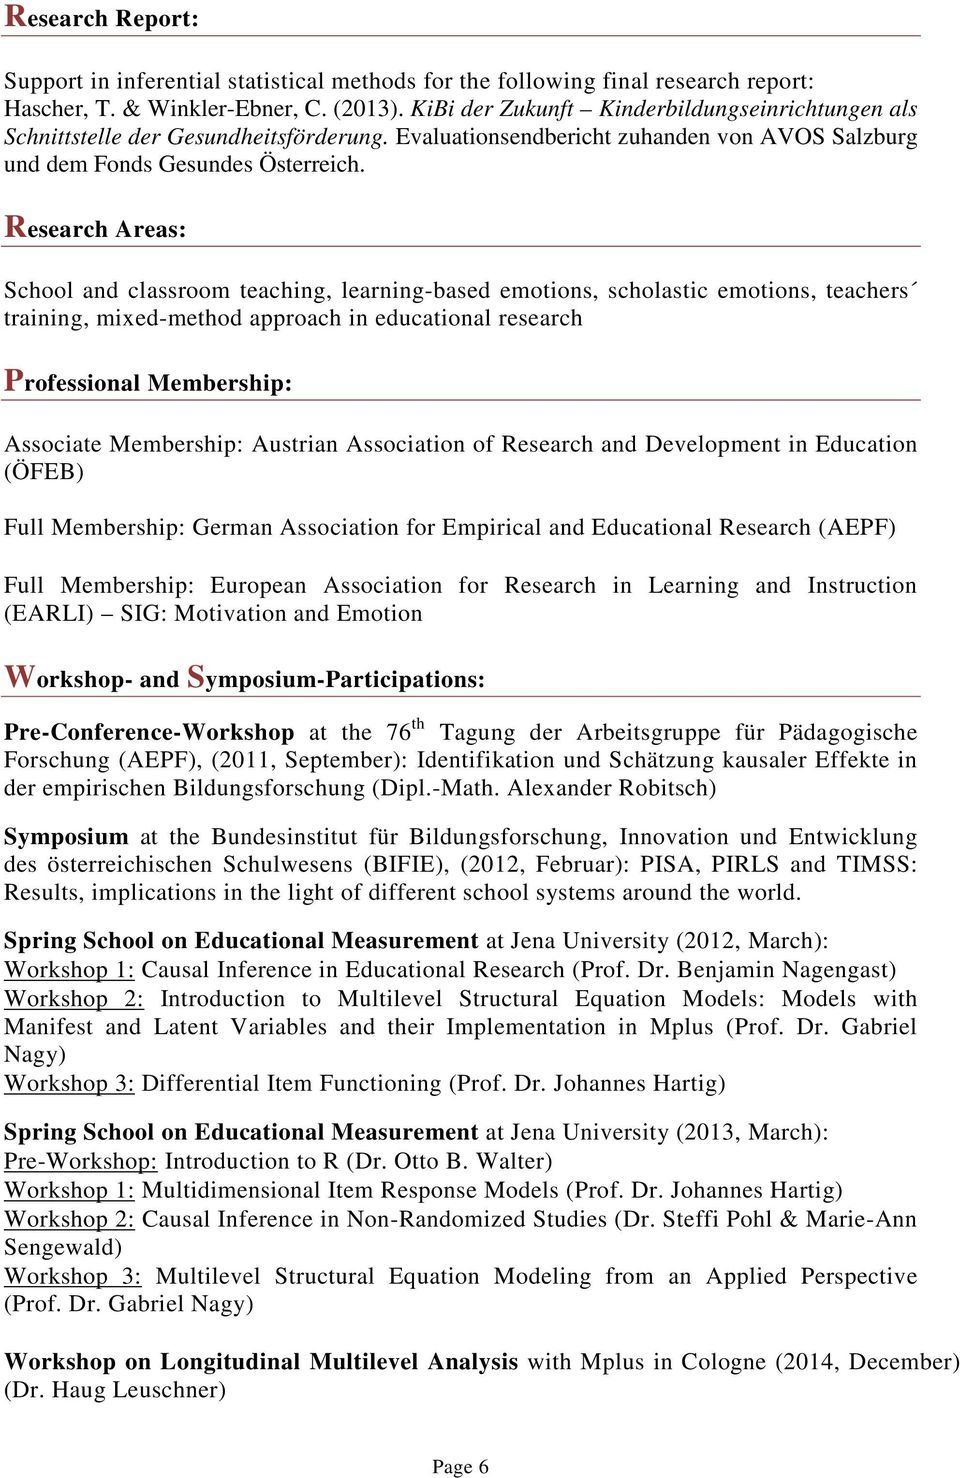 Research Areas: School and classroom teaching, learning-based emotions, scholastic emotions, teachers training, mixed-method approach in educational research Professional Membership: Associate